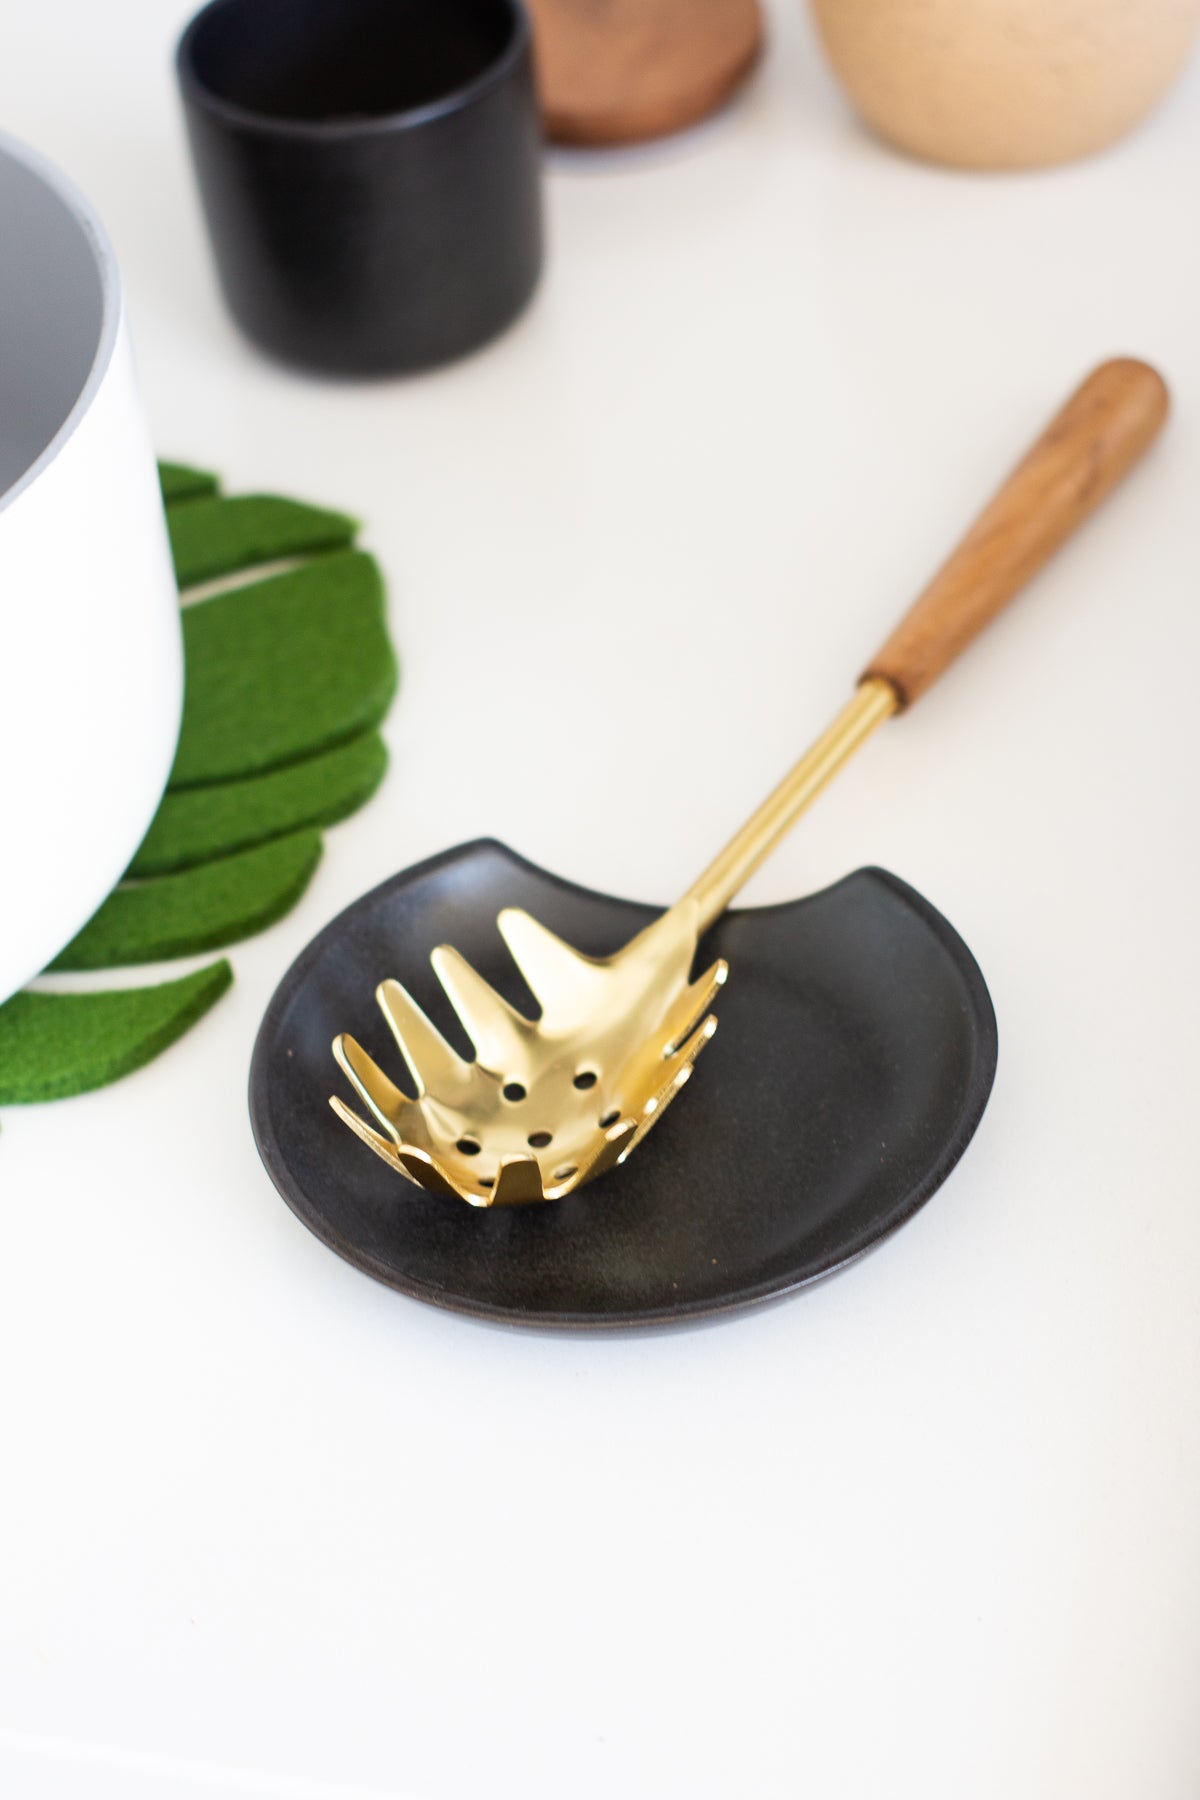 Black and Gold Utensil Holder with Built-in Spoon Rest